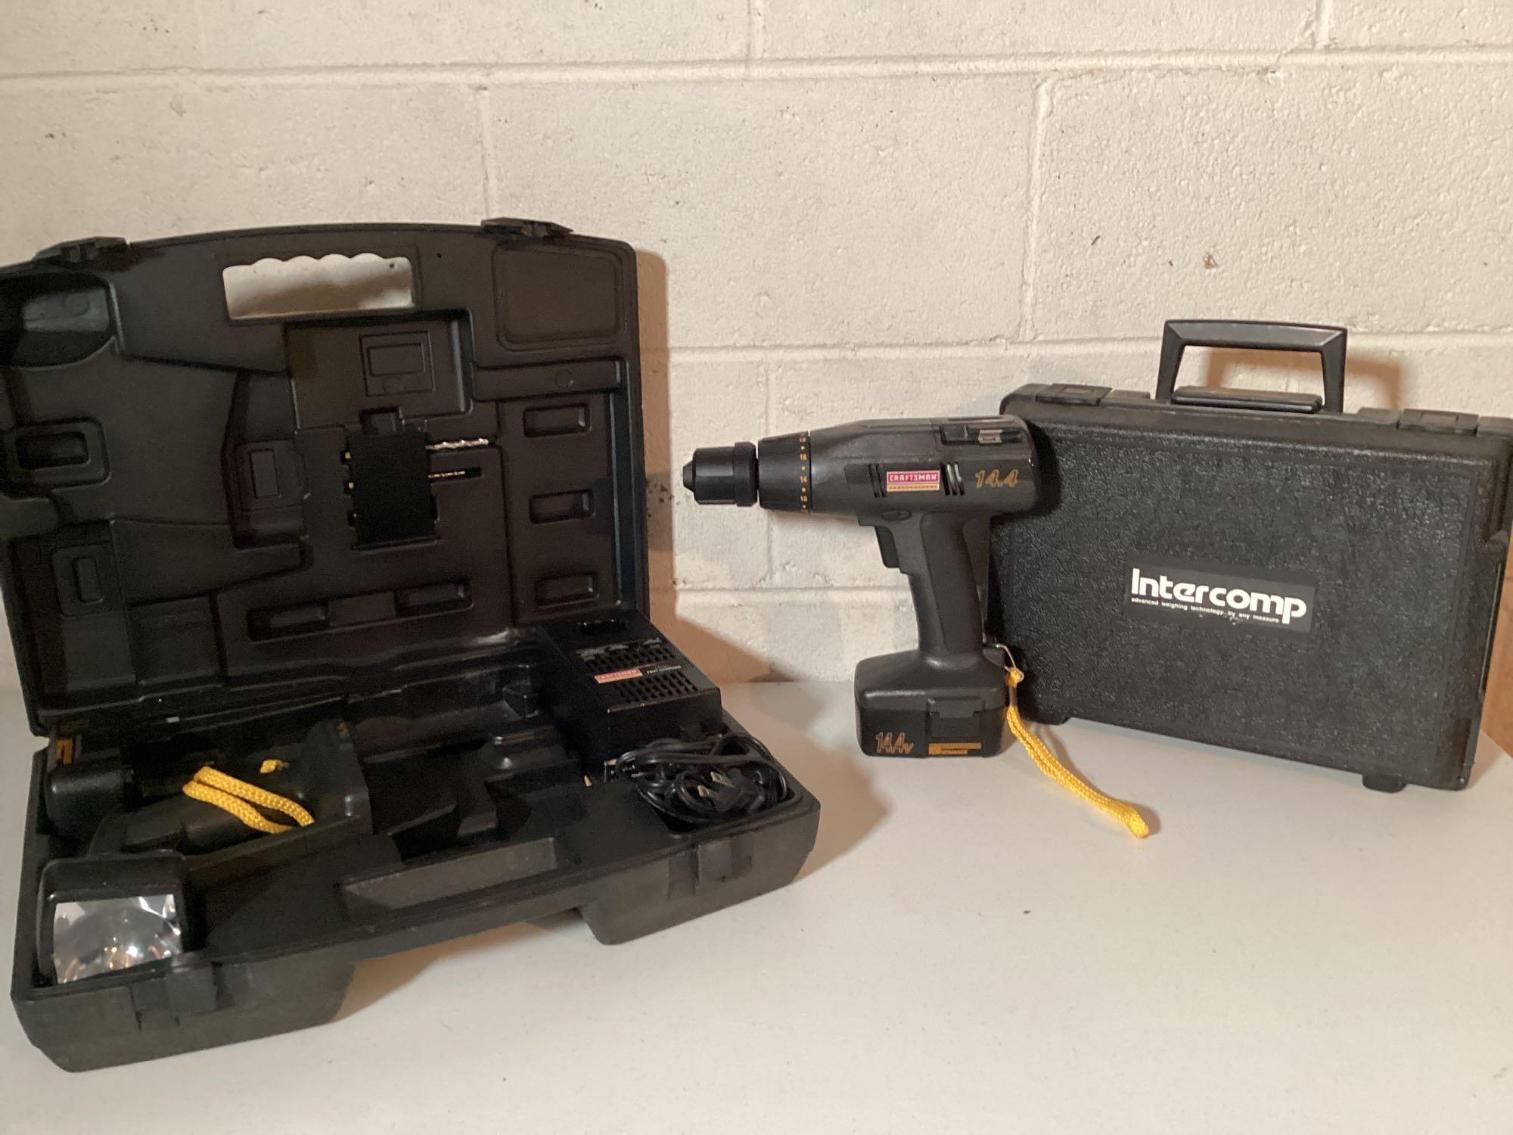 Image for Craftsman 14.4 cordless drill and light